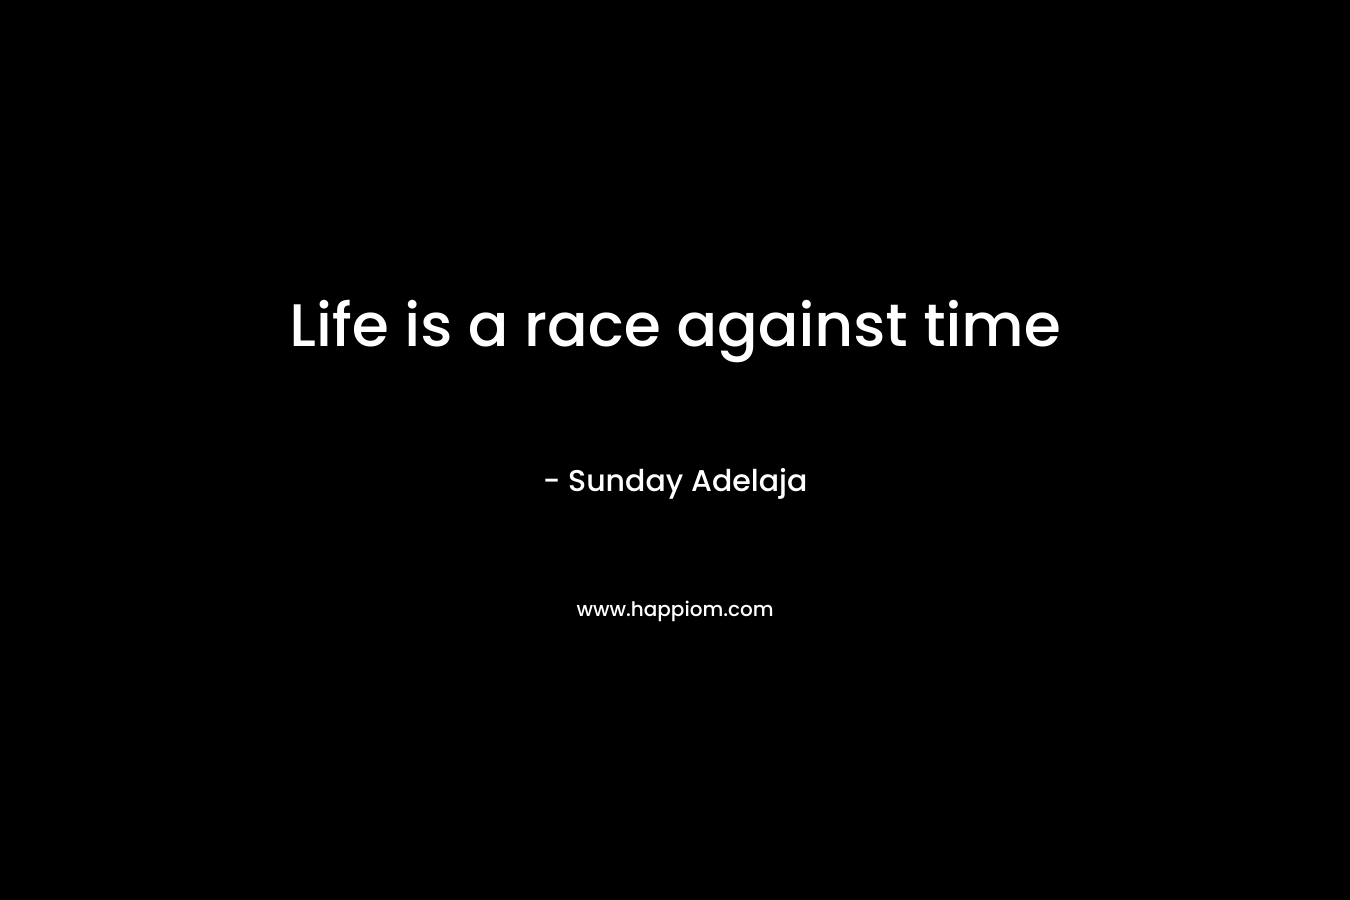 Life is a race against time